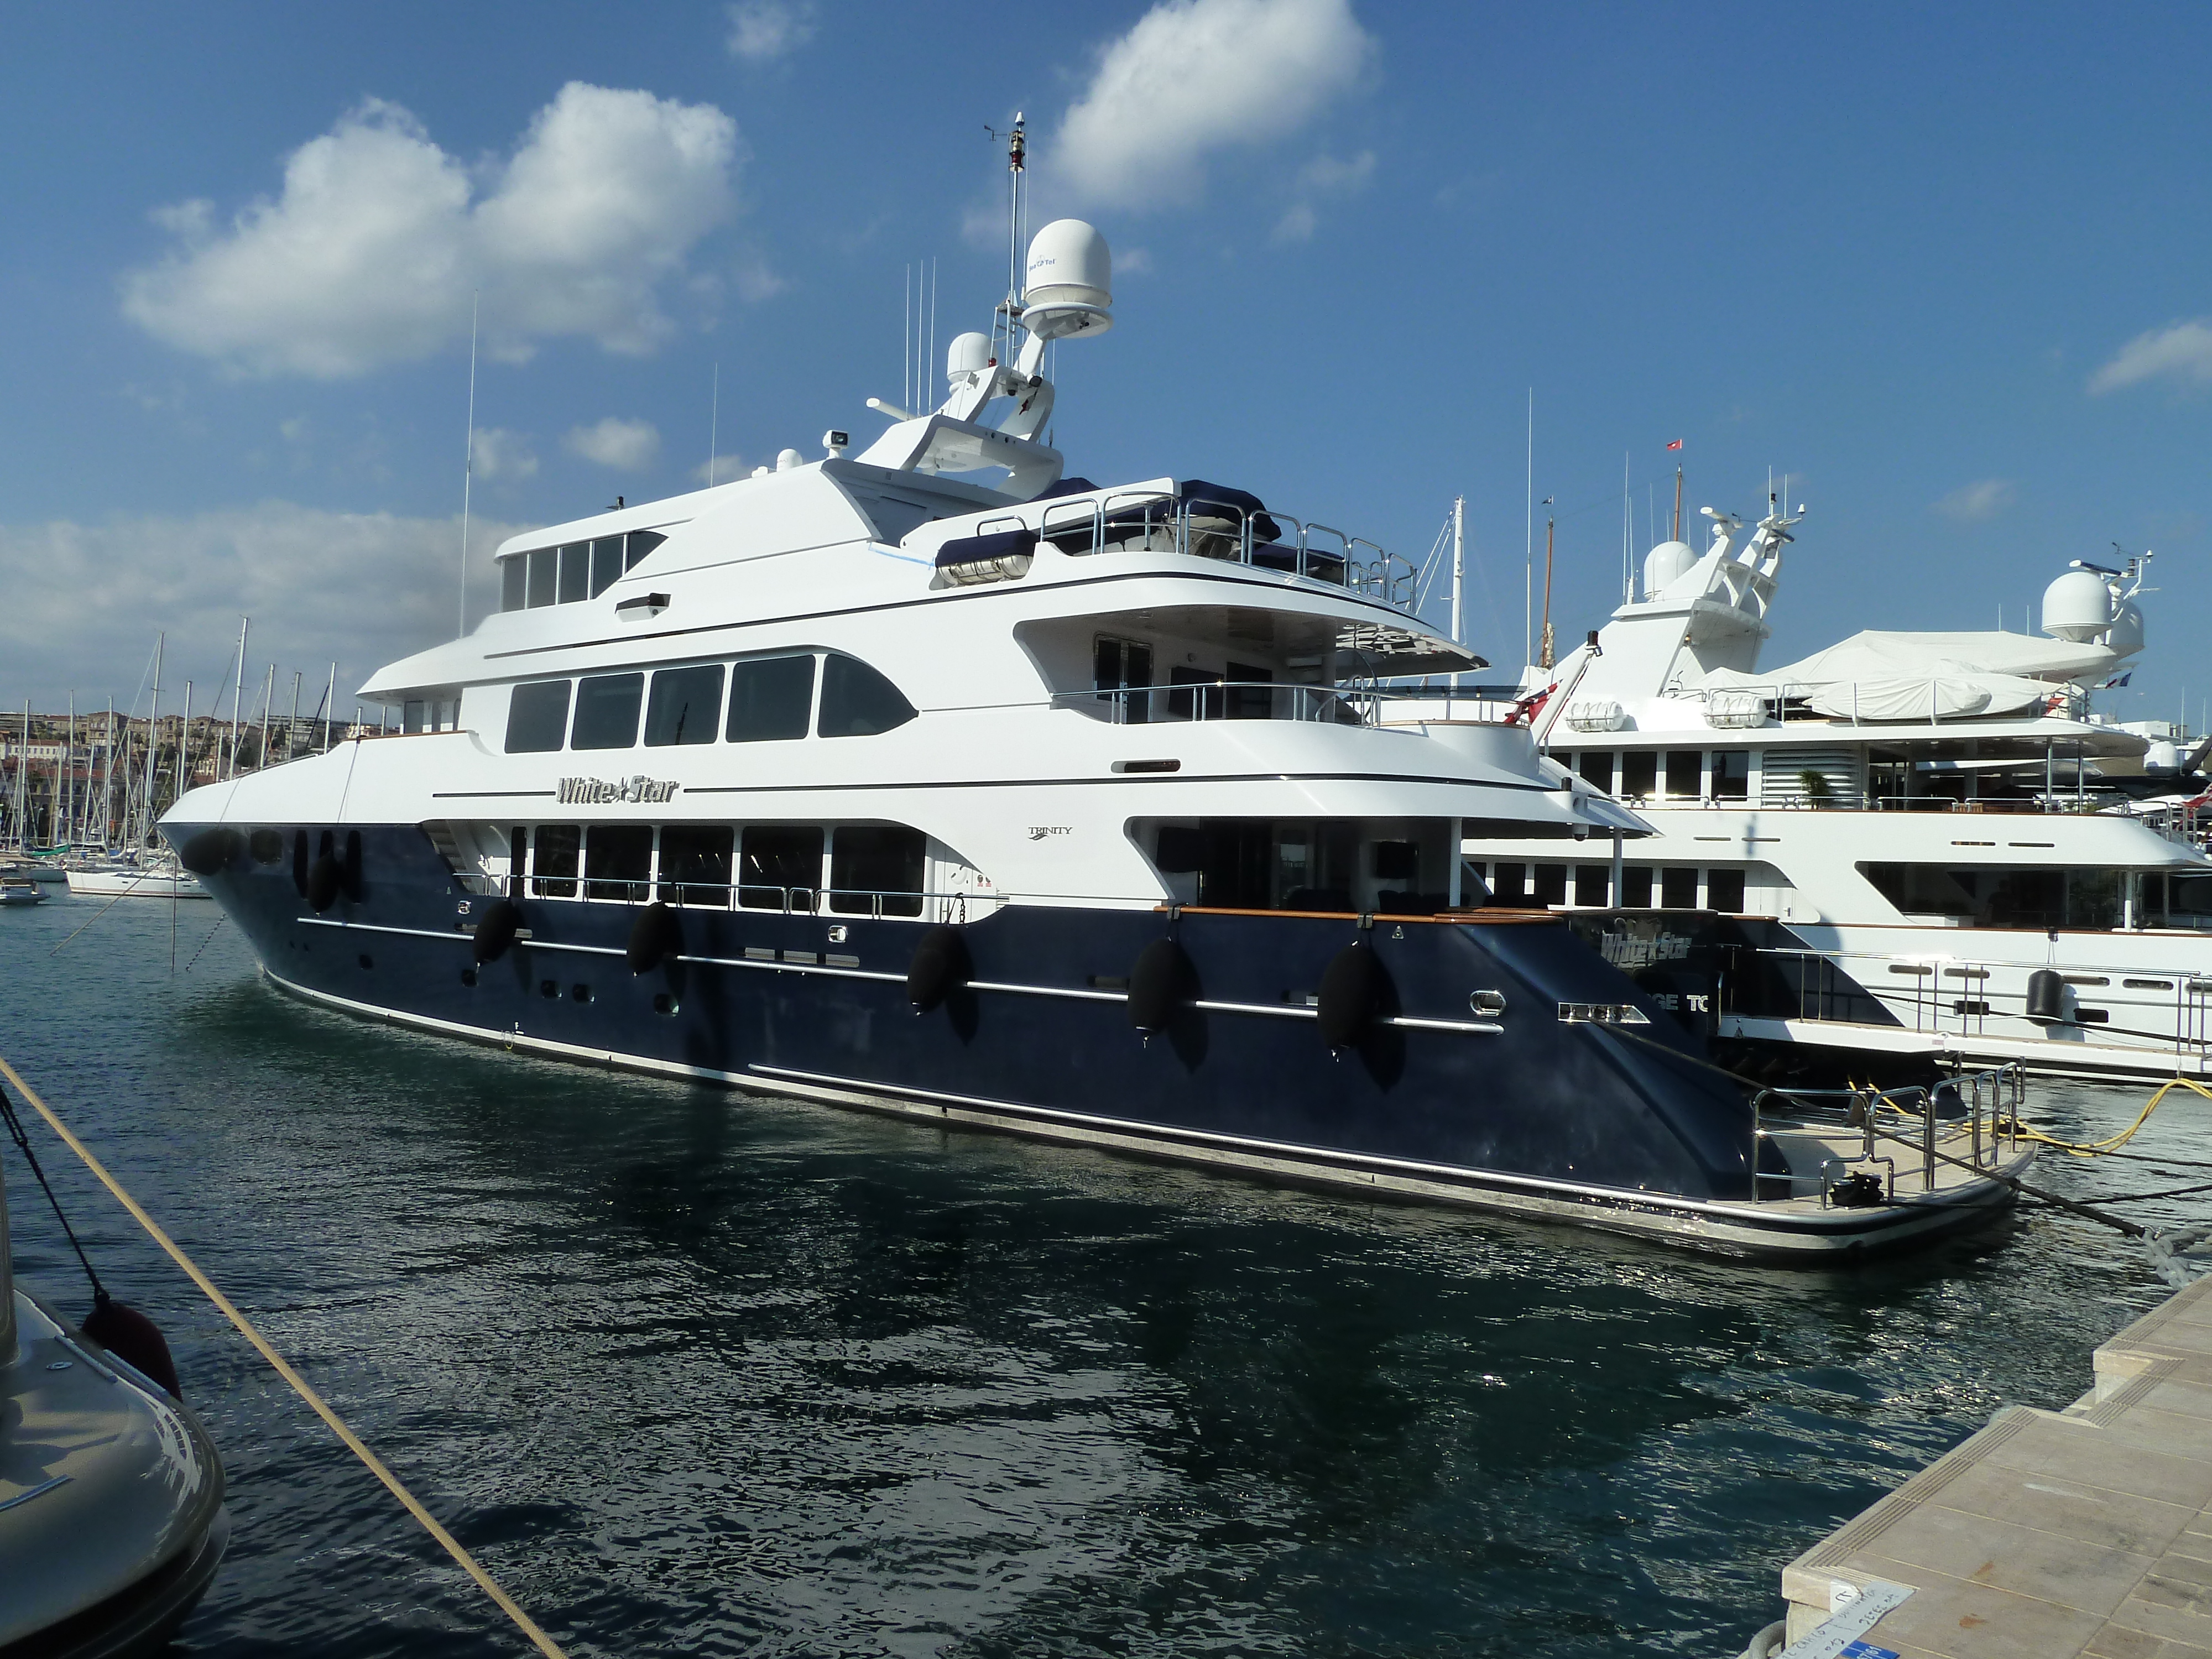 File:WHITE STAR Trinity Yacht in Cannes 01.JPG - Wikimedia Commons